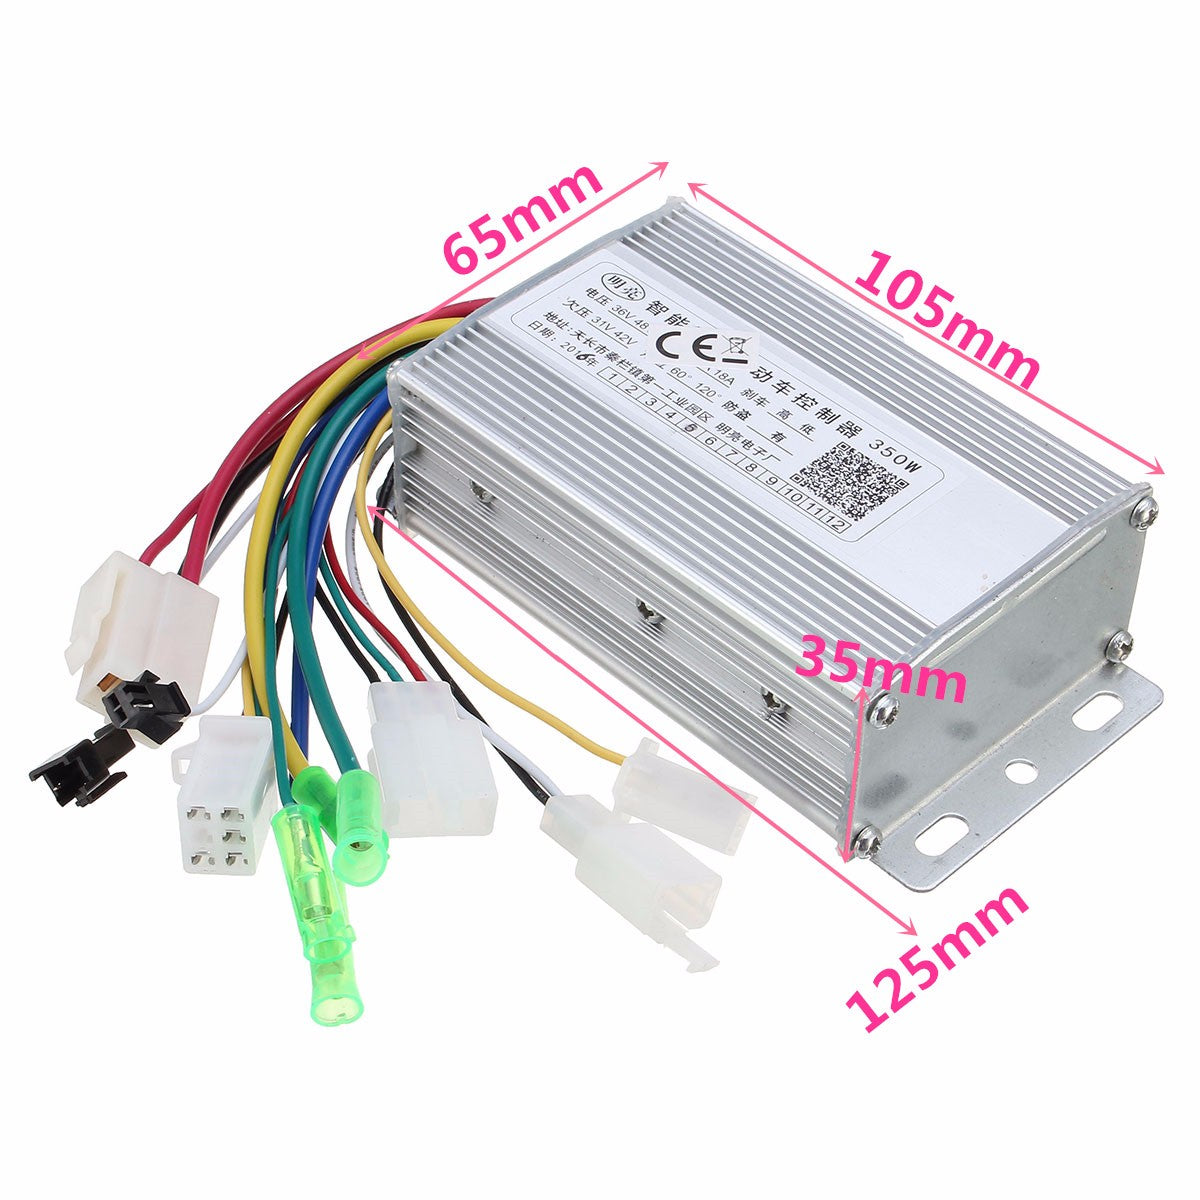 350W 36V/48V Brushless Controller For Scooter E- bike With/Without Hall Sensor